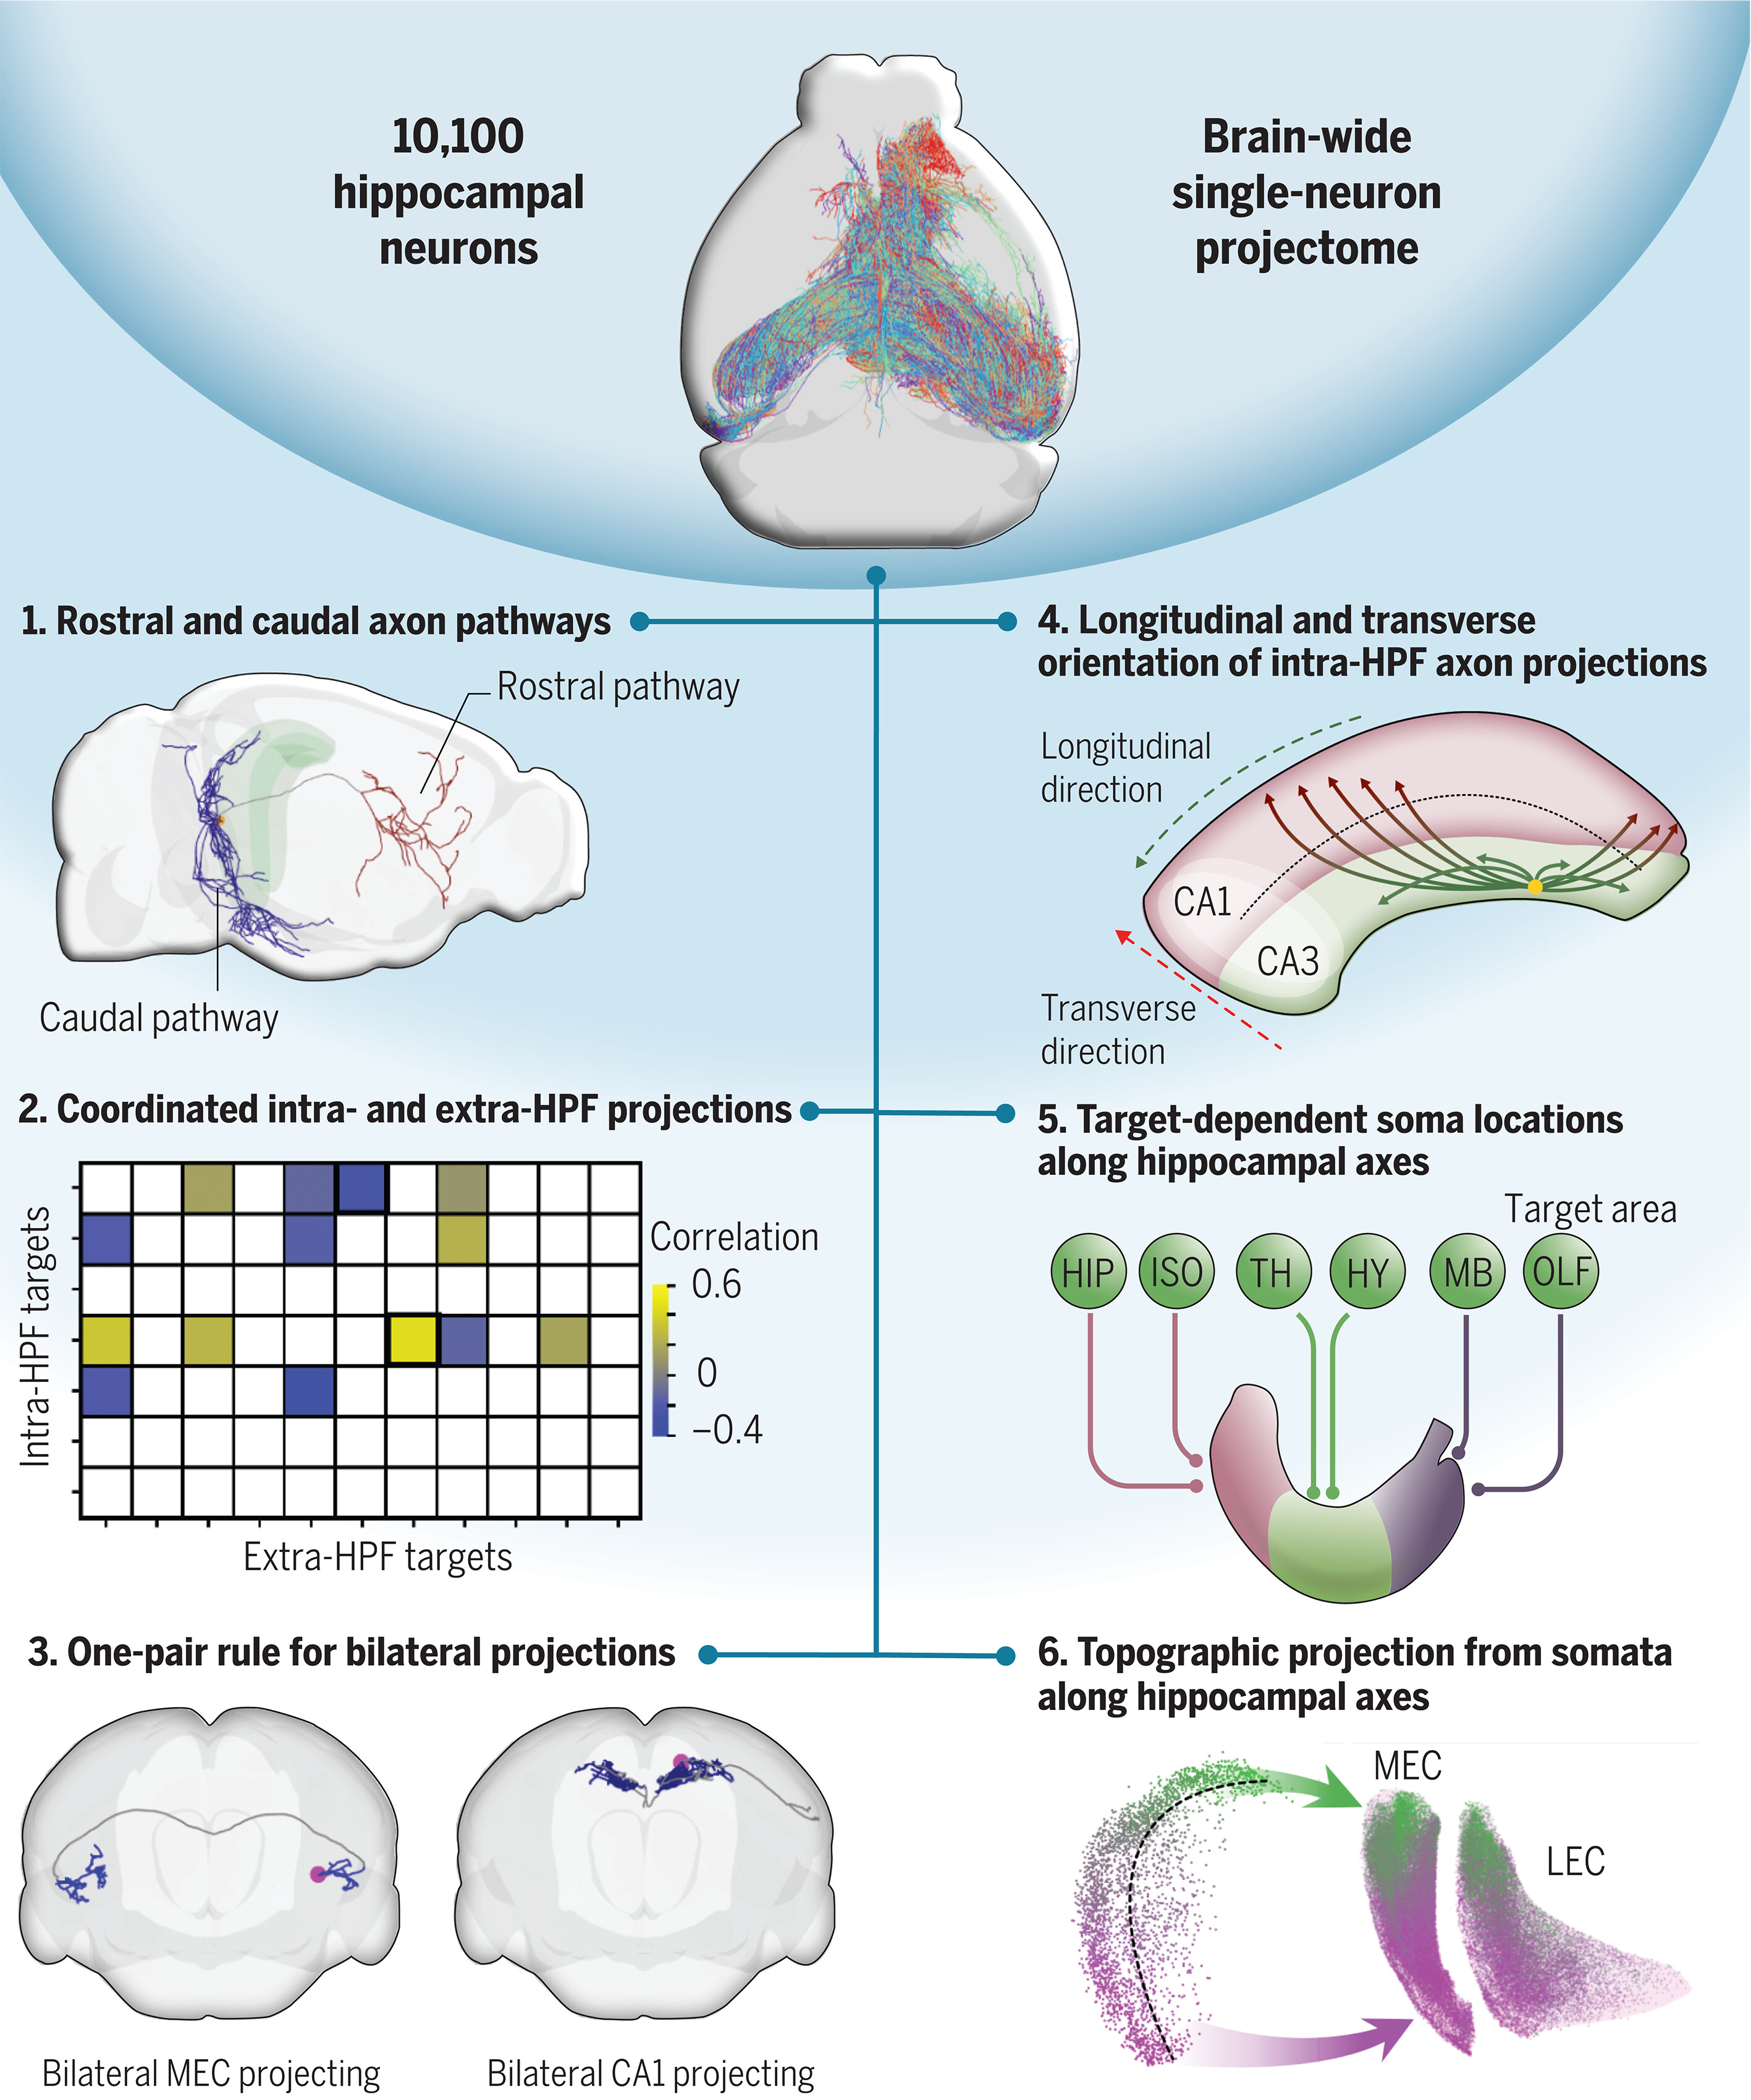 A screenshot of an illustration of the study published in the journal Science, showing spatial organization principles of HIP single-neuron projectomes.